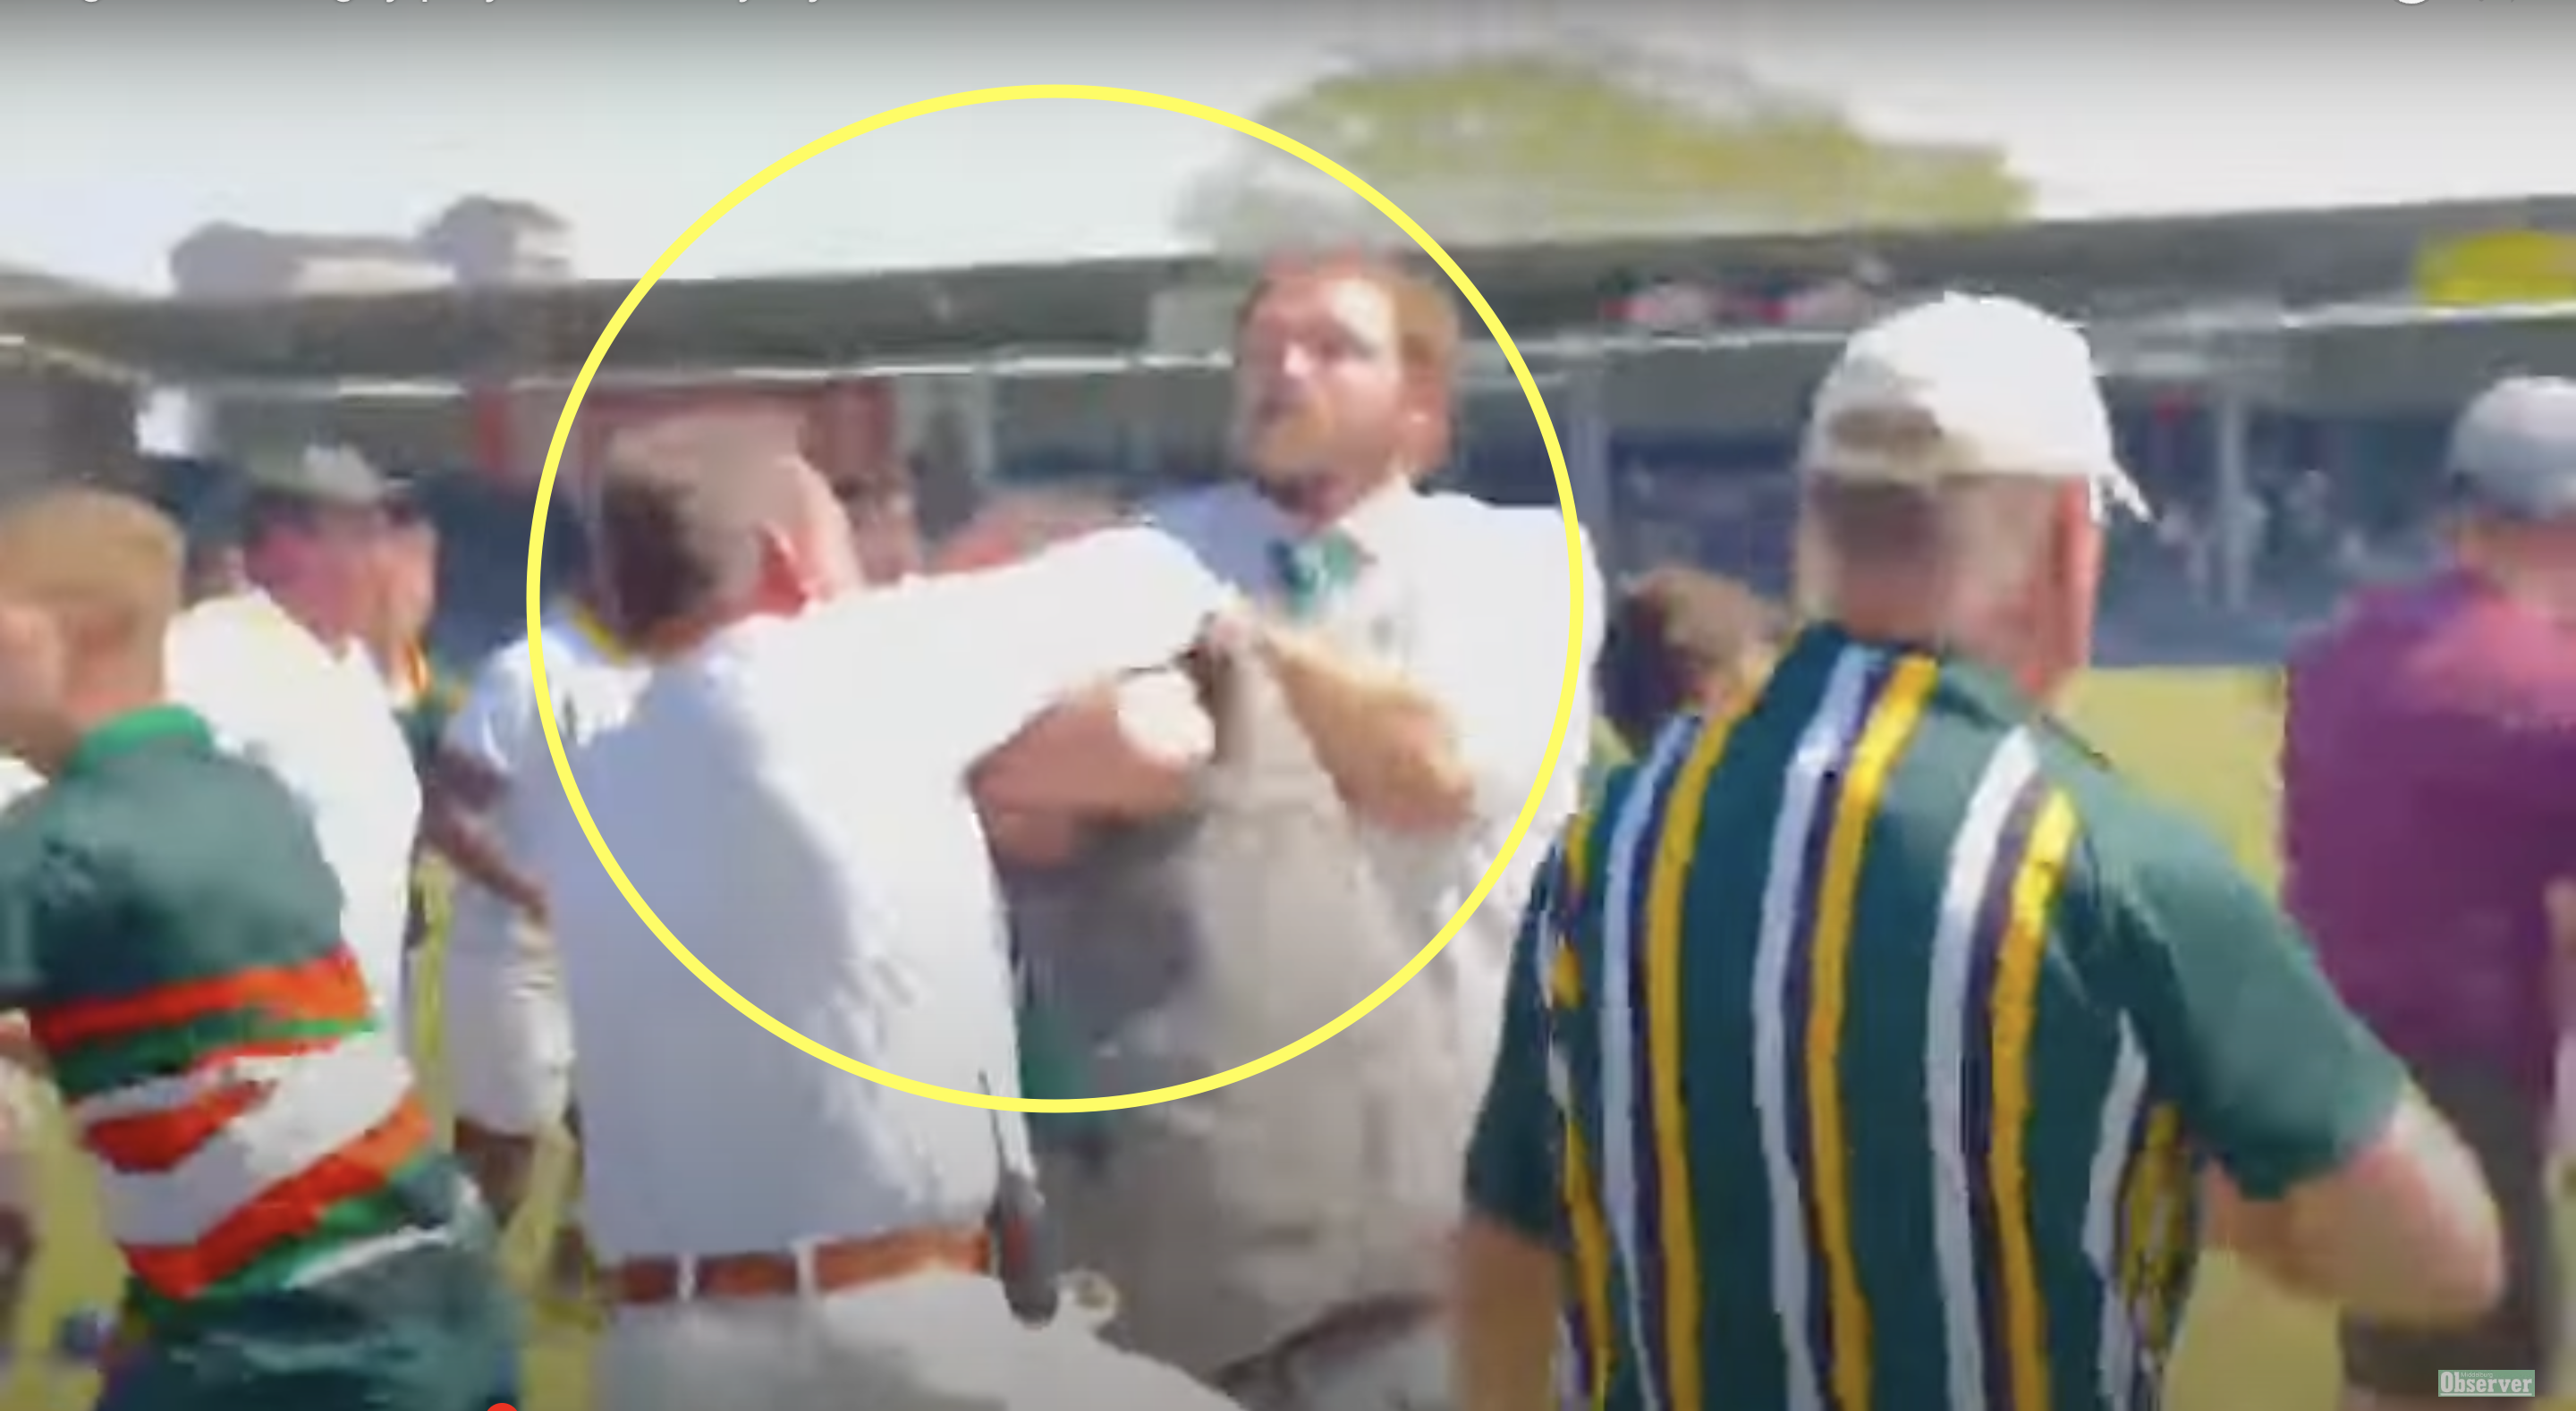 Coaches start uncontrollable brawl at South Africa schools match